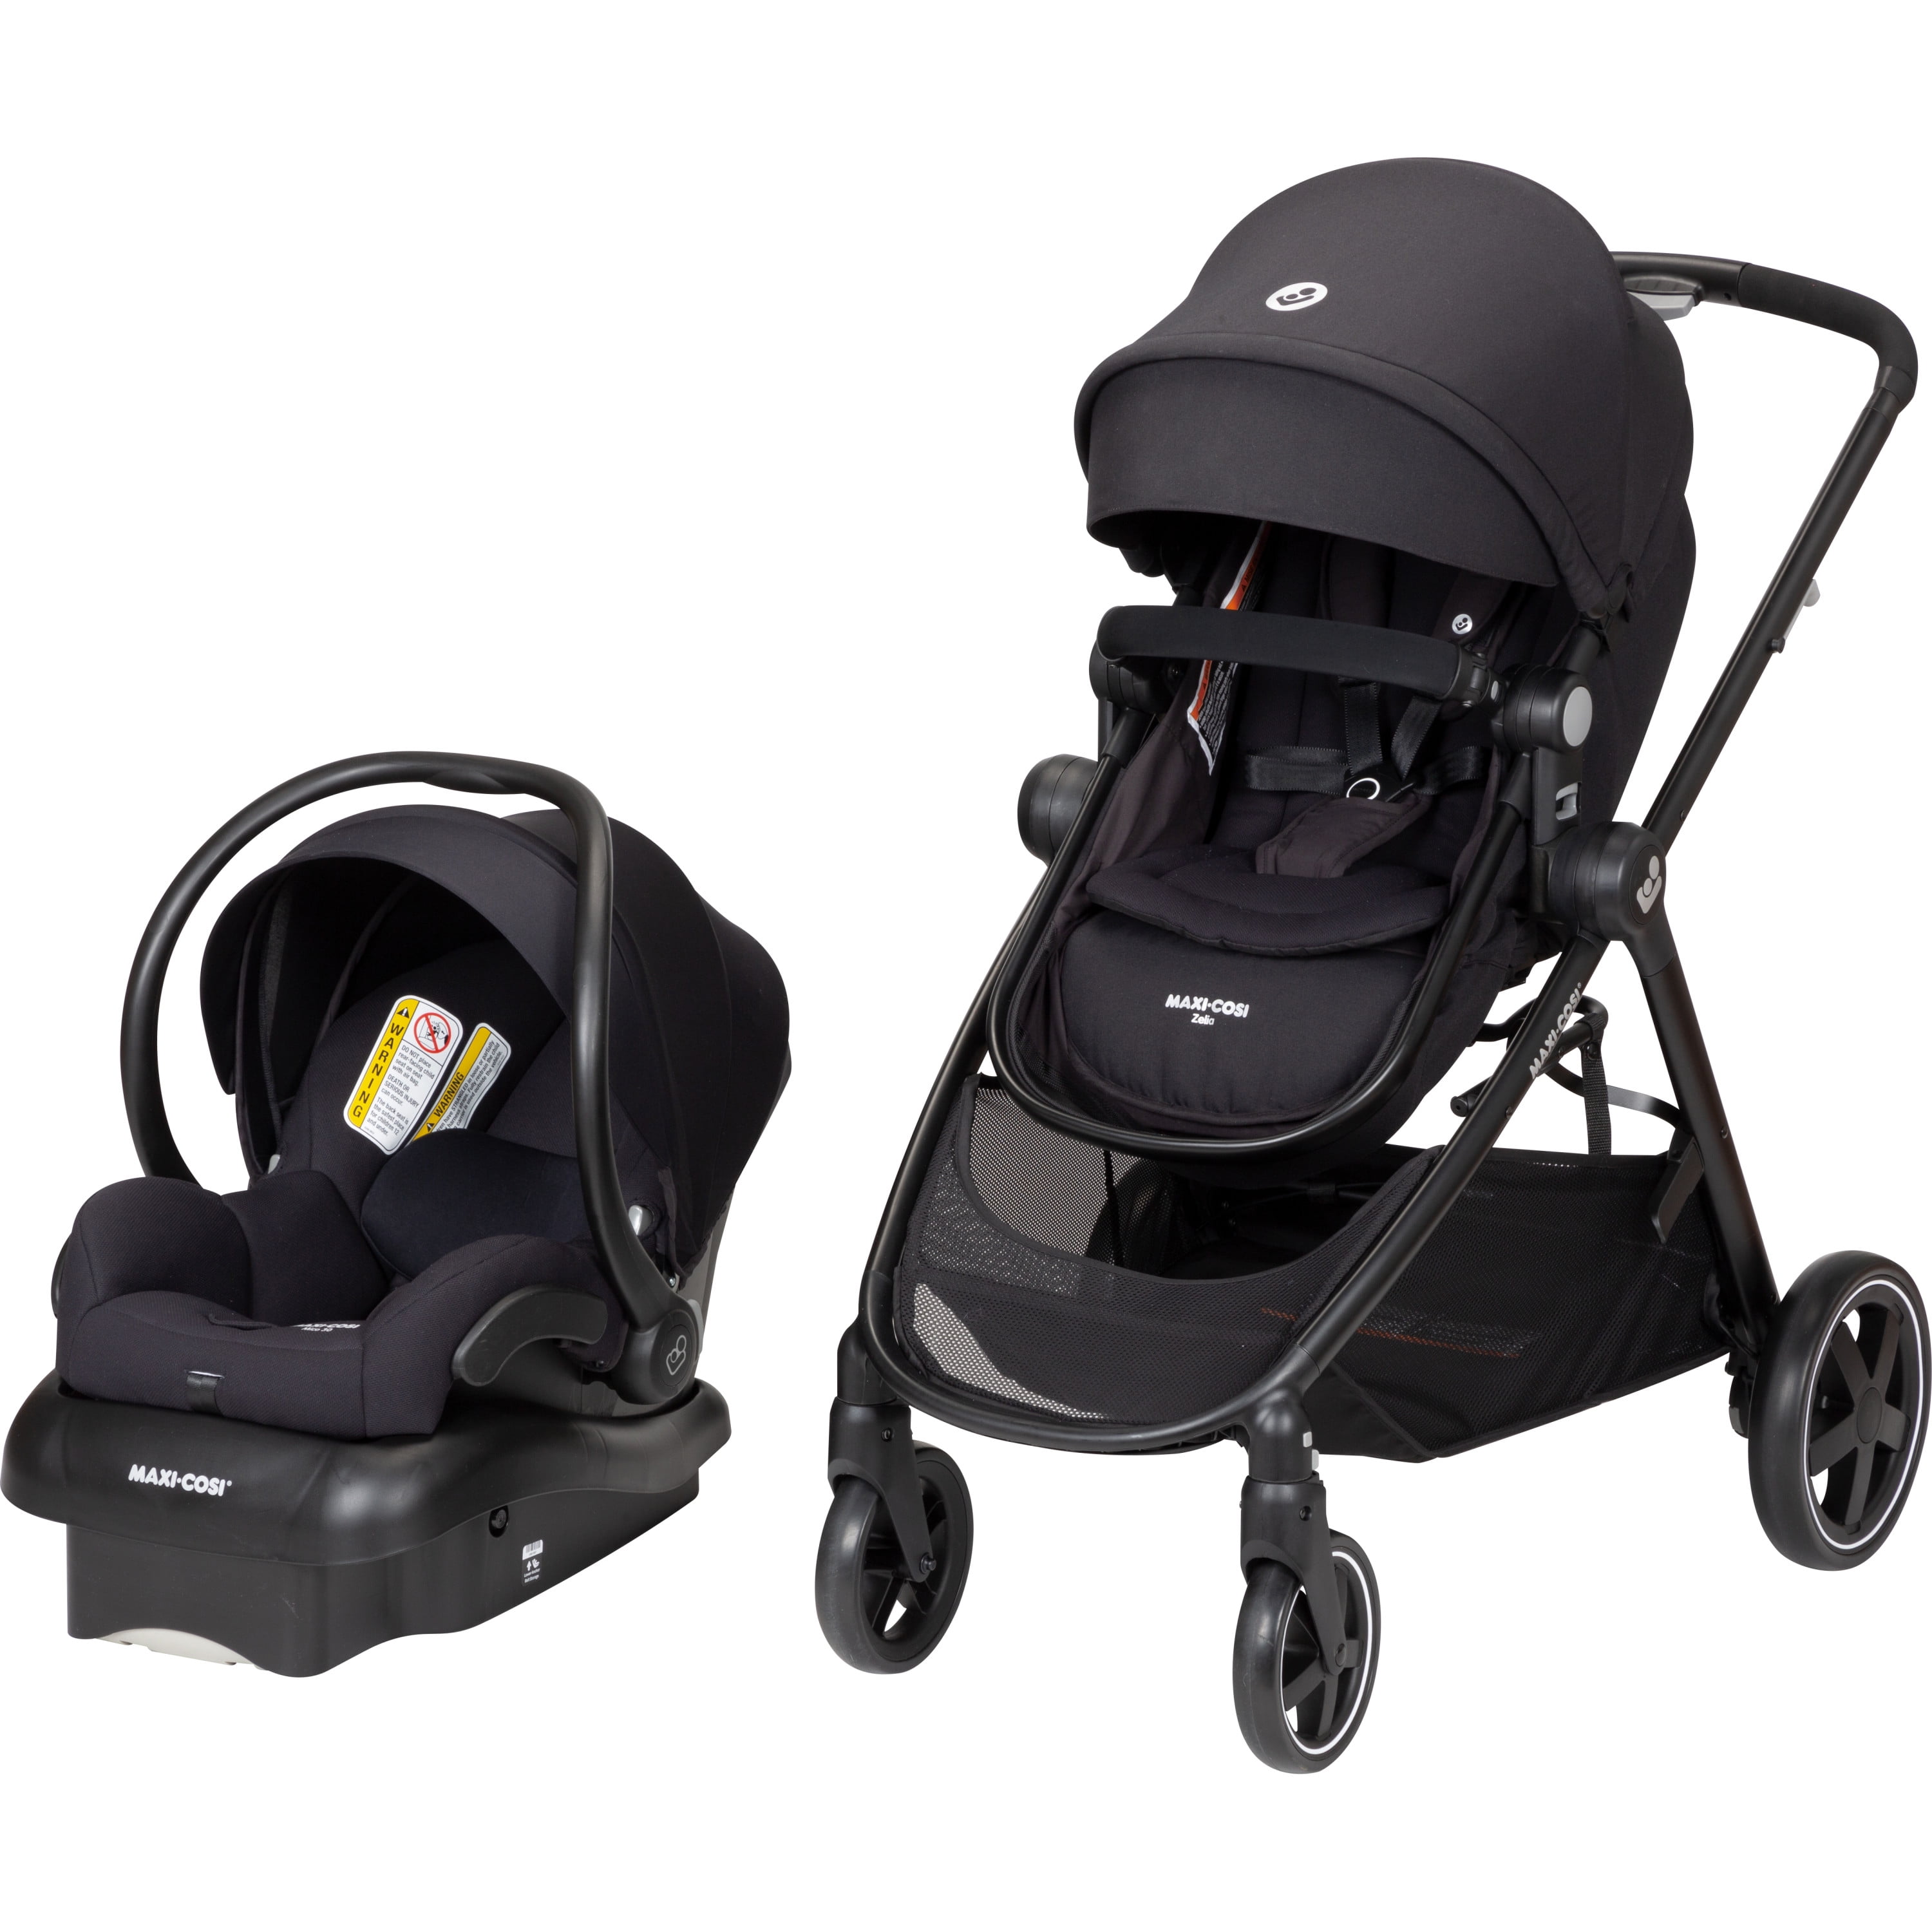 safety first smooth ride travel system safety rating